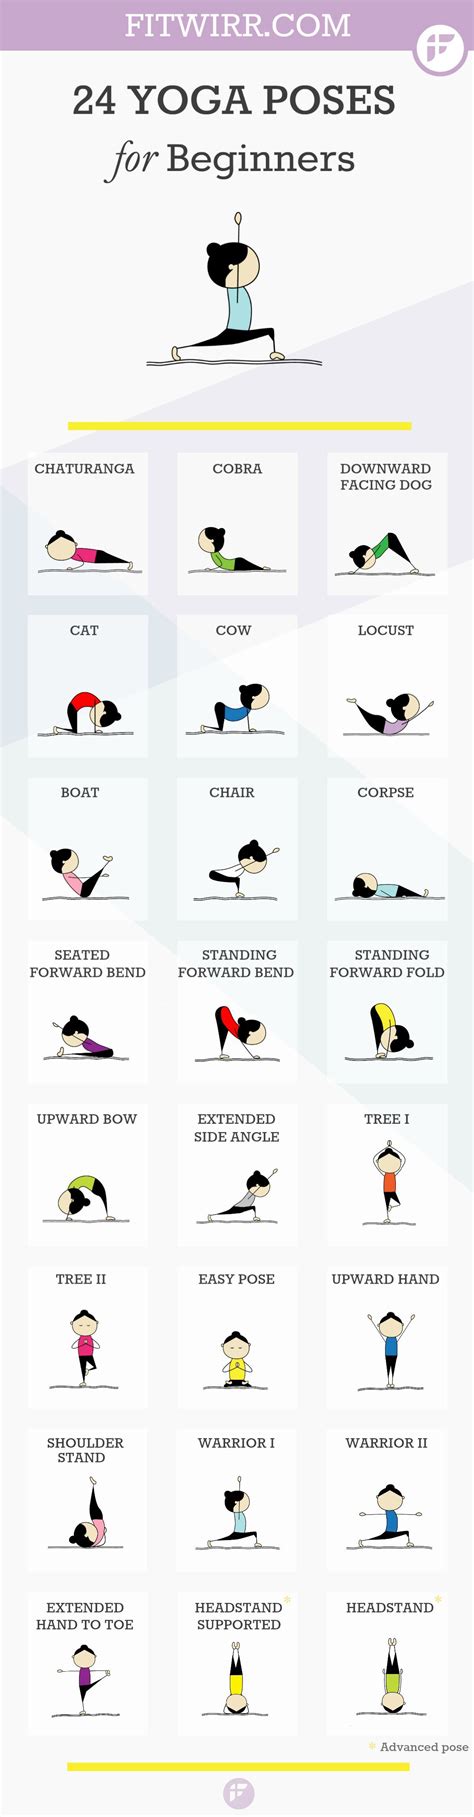 24 Yoga Poses For Beginners Pictures Photos And Images